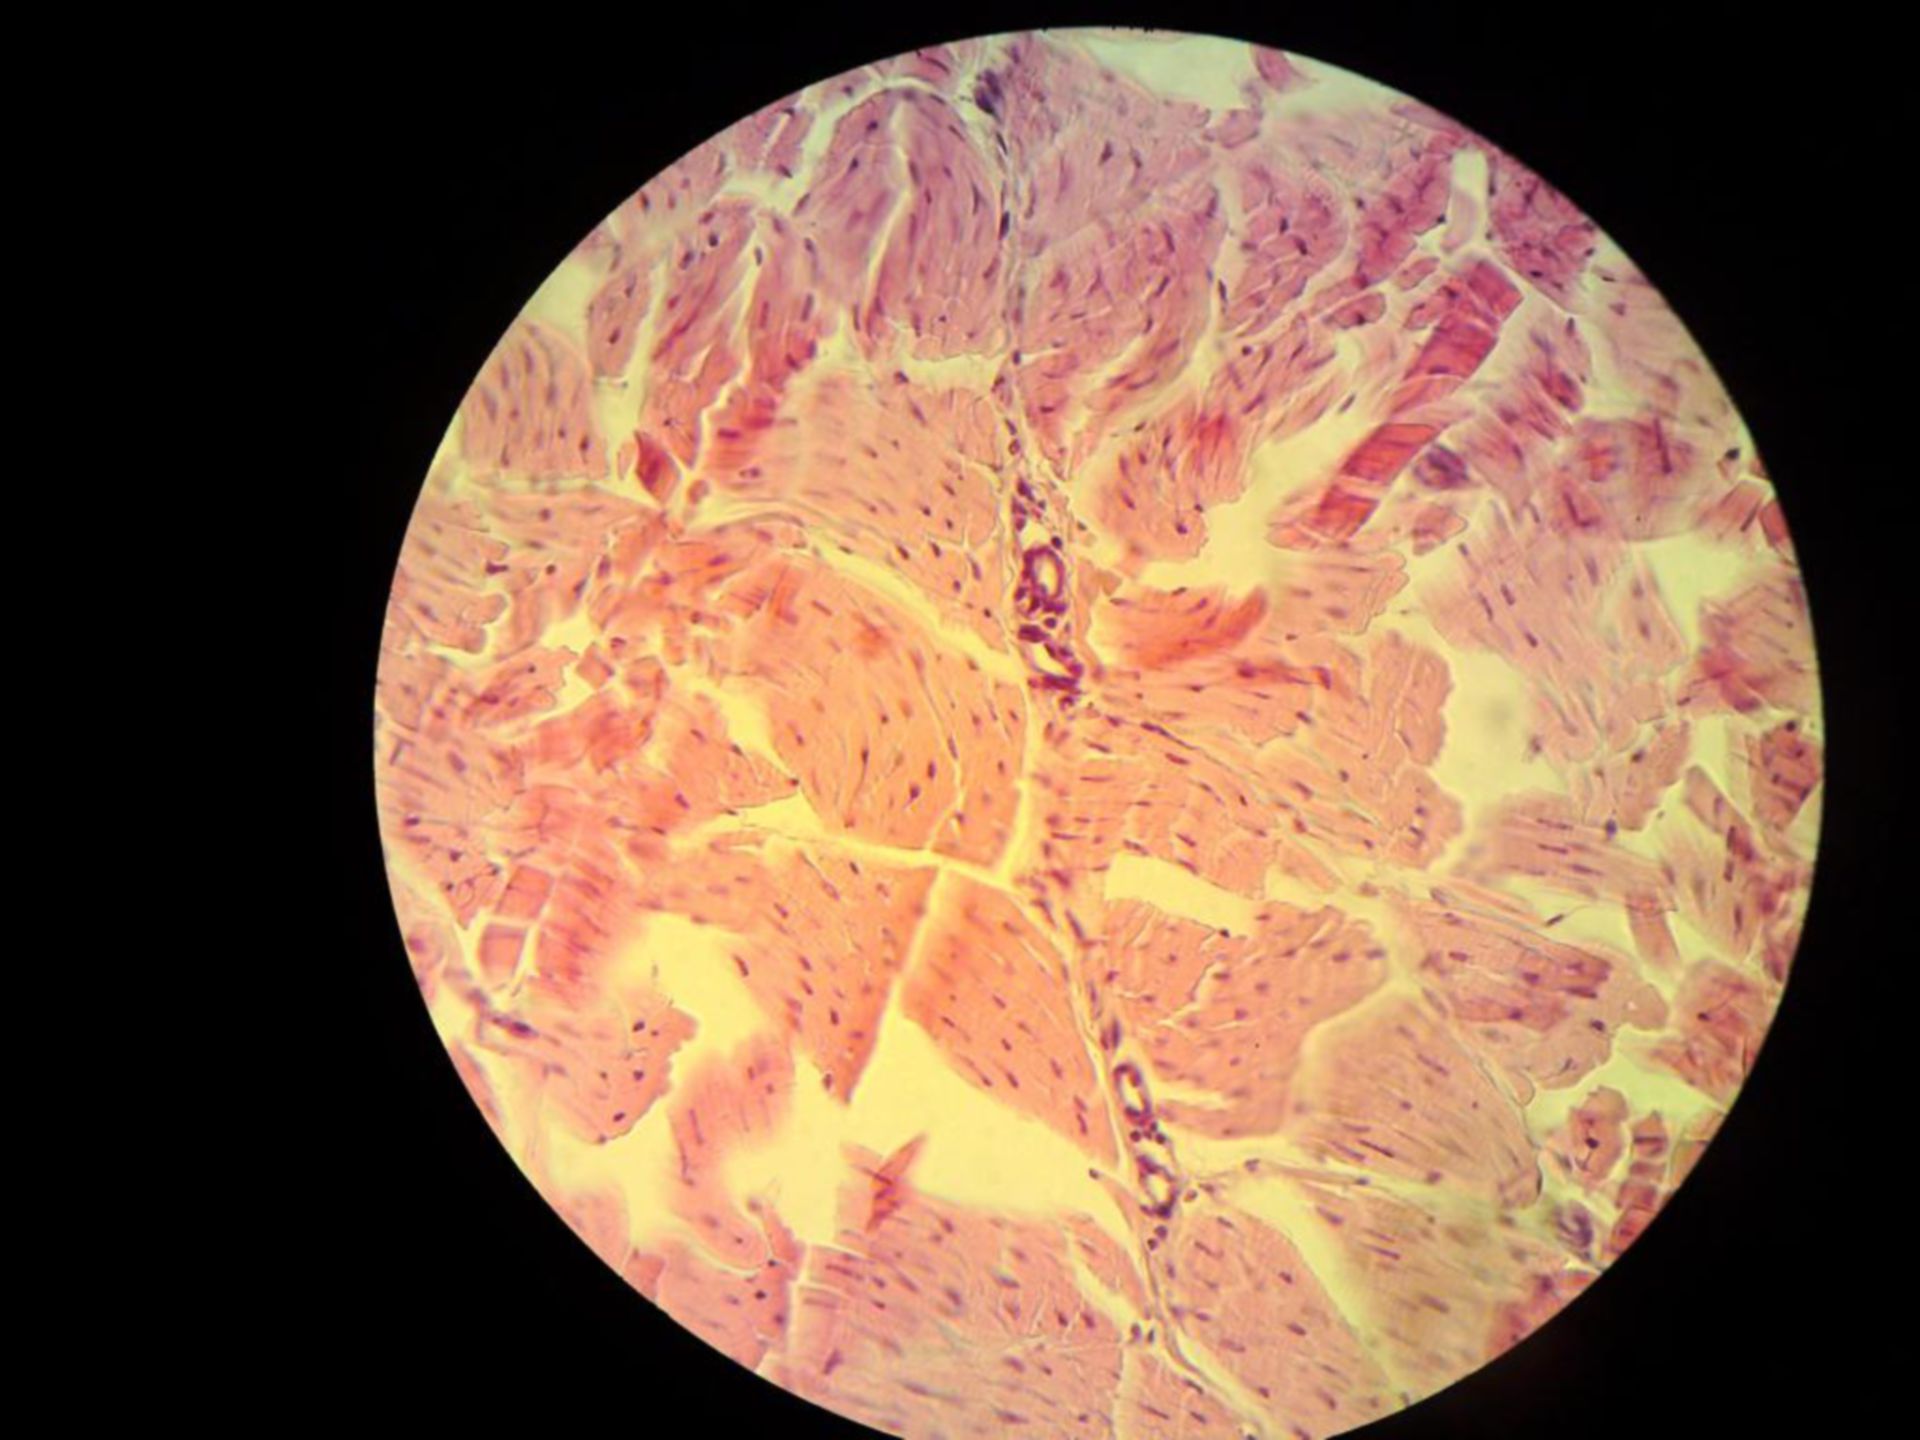 Taut connective tissue - cross-section of the tendon of a dog